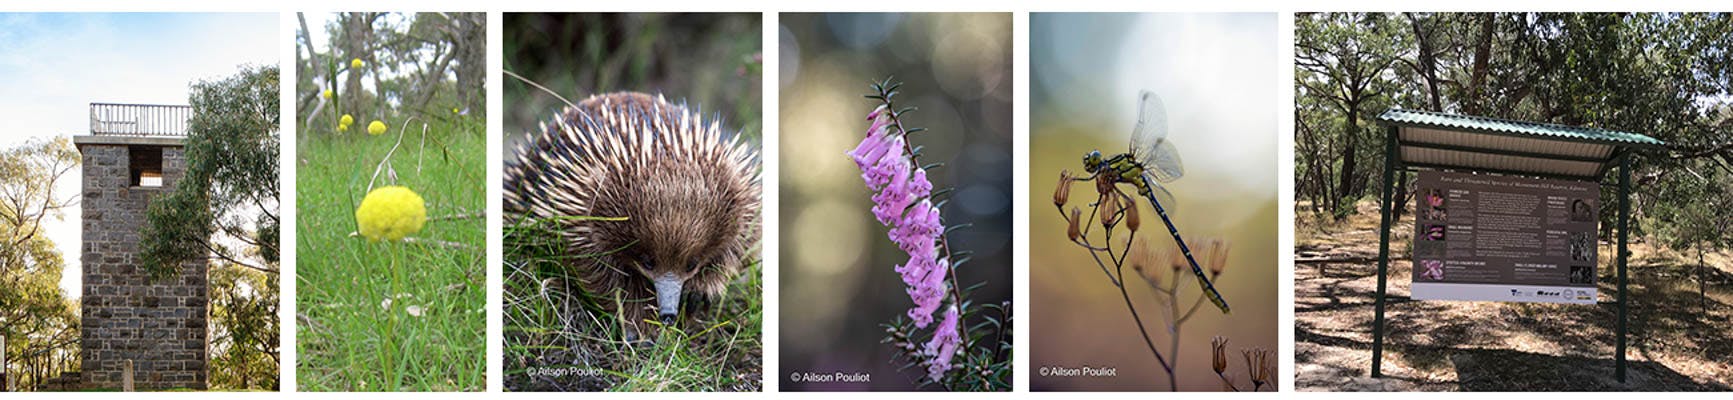 A historic tower, yellow button flowers, an echidna, pink heath, a dragonfly and an interpretive sign